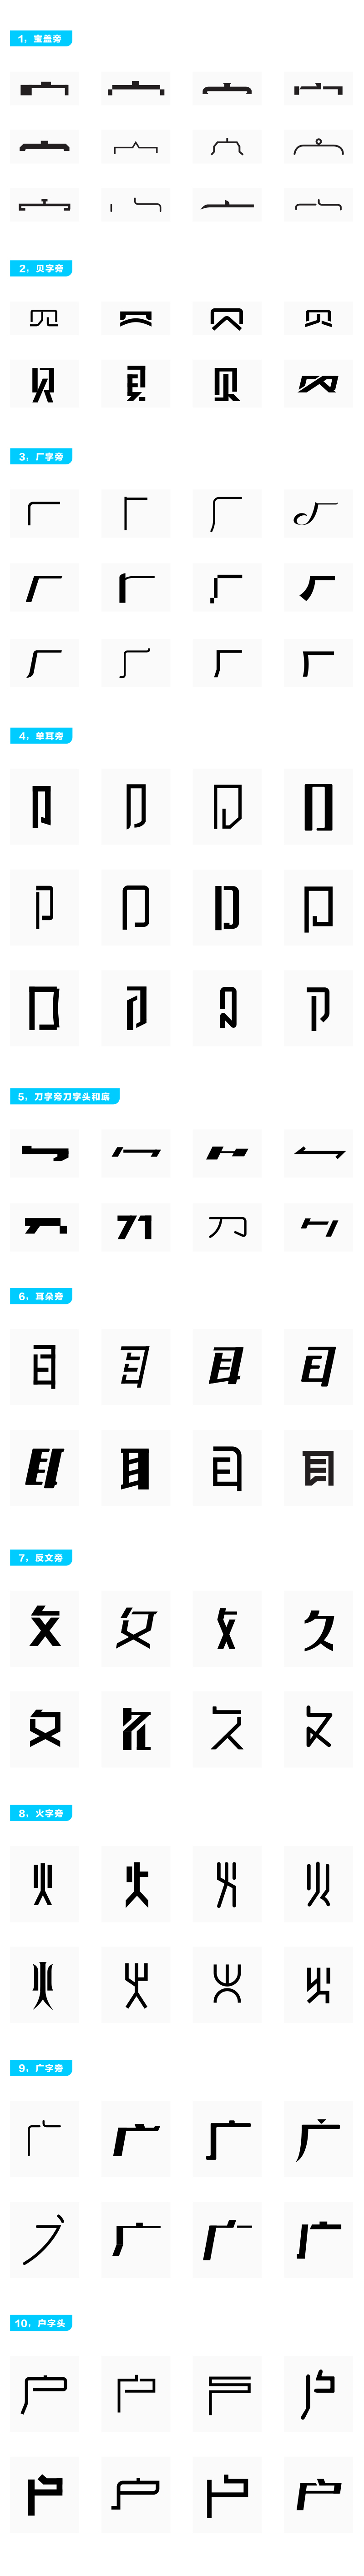 Chinese font design reference - Chinese character radical and Indexing component #.1